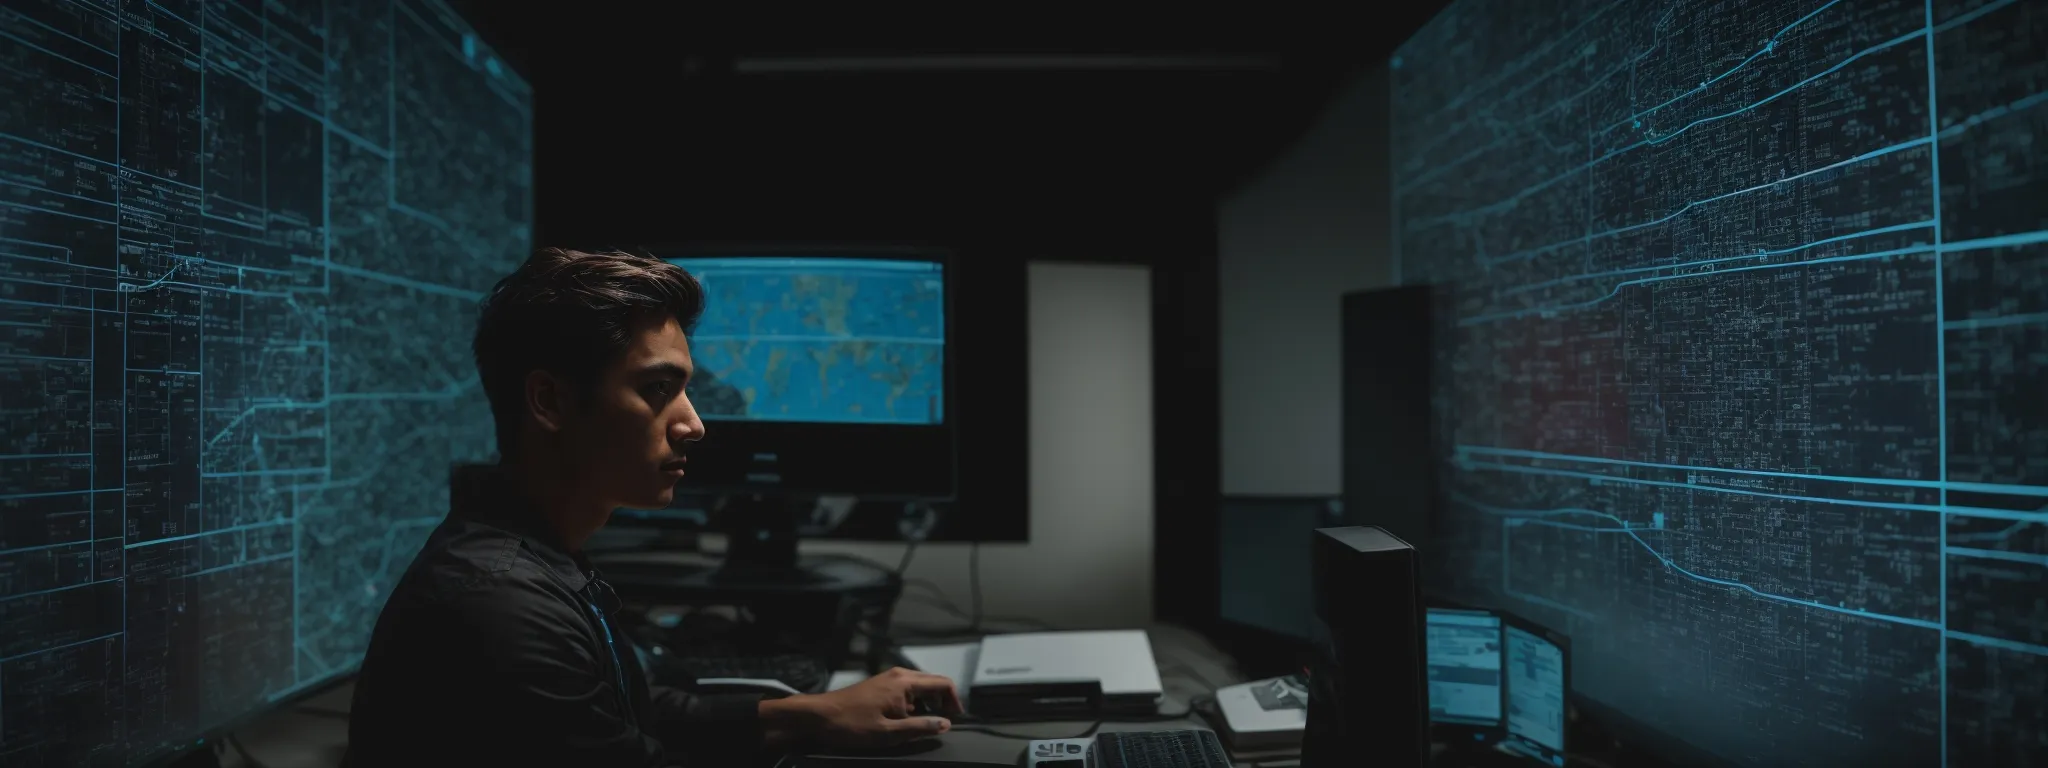 a focused individual in front of a computer, intently navigating through a complex digital map of interconnected websites and data streams.